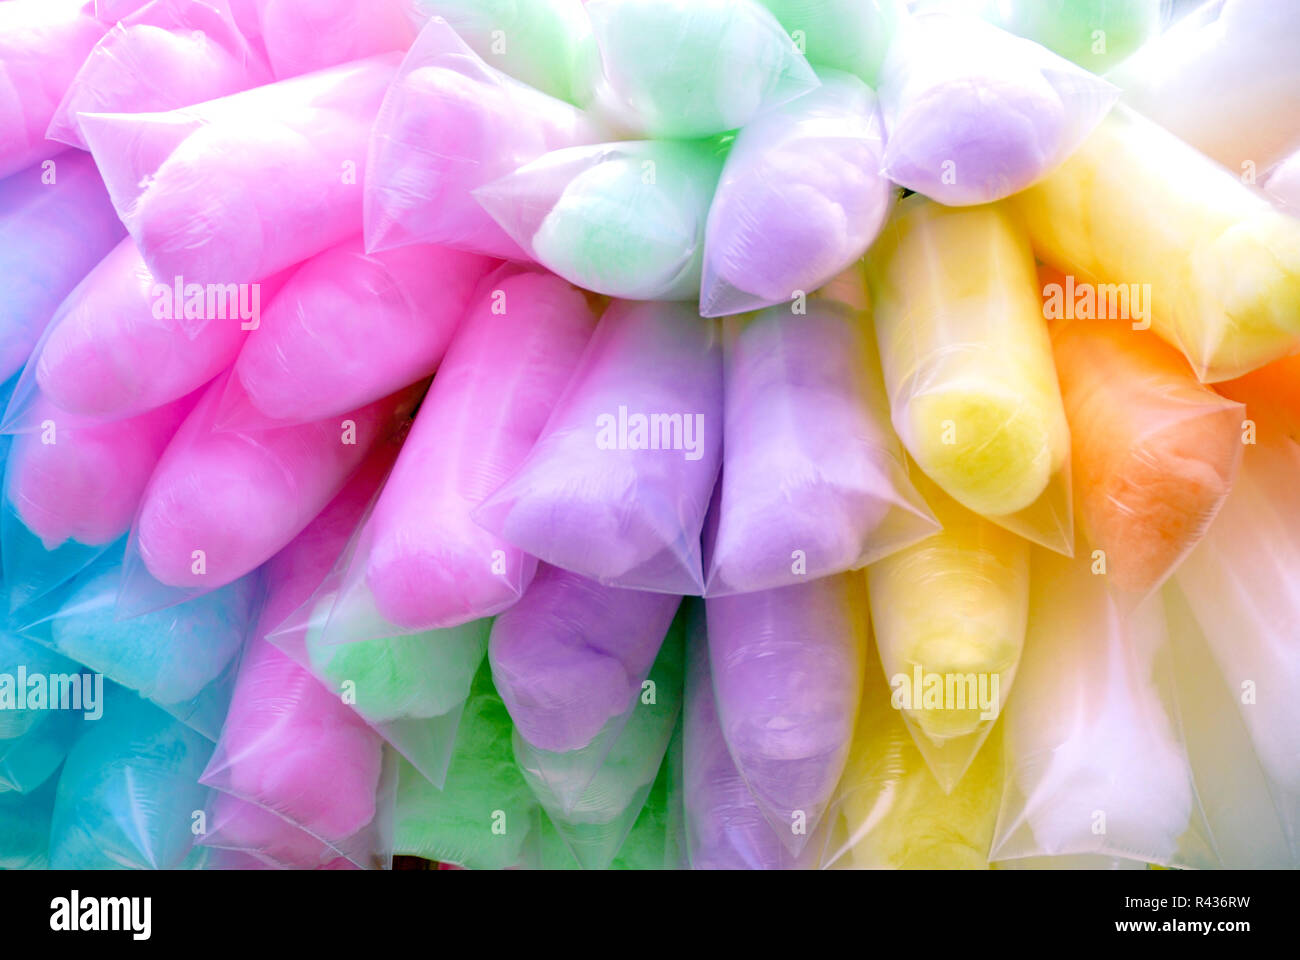 Colorful bags of cotton candy Stock Photo - Alamy